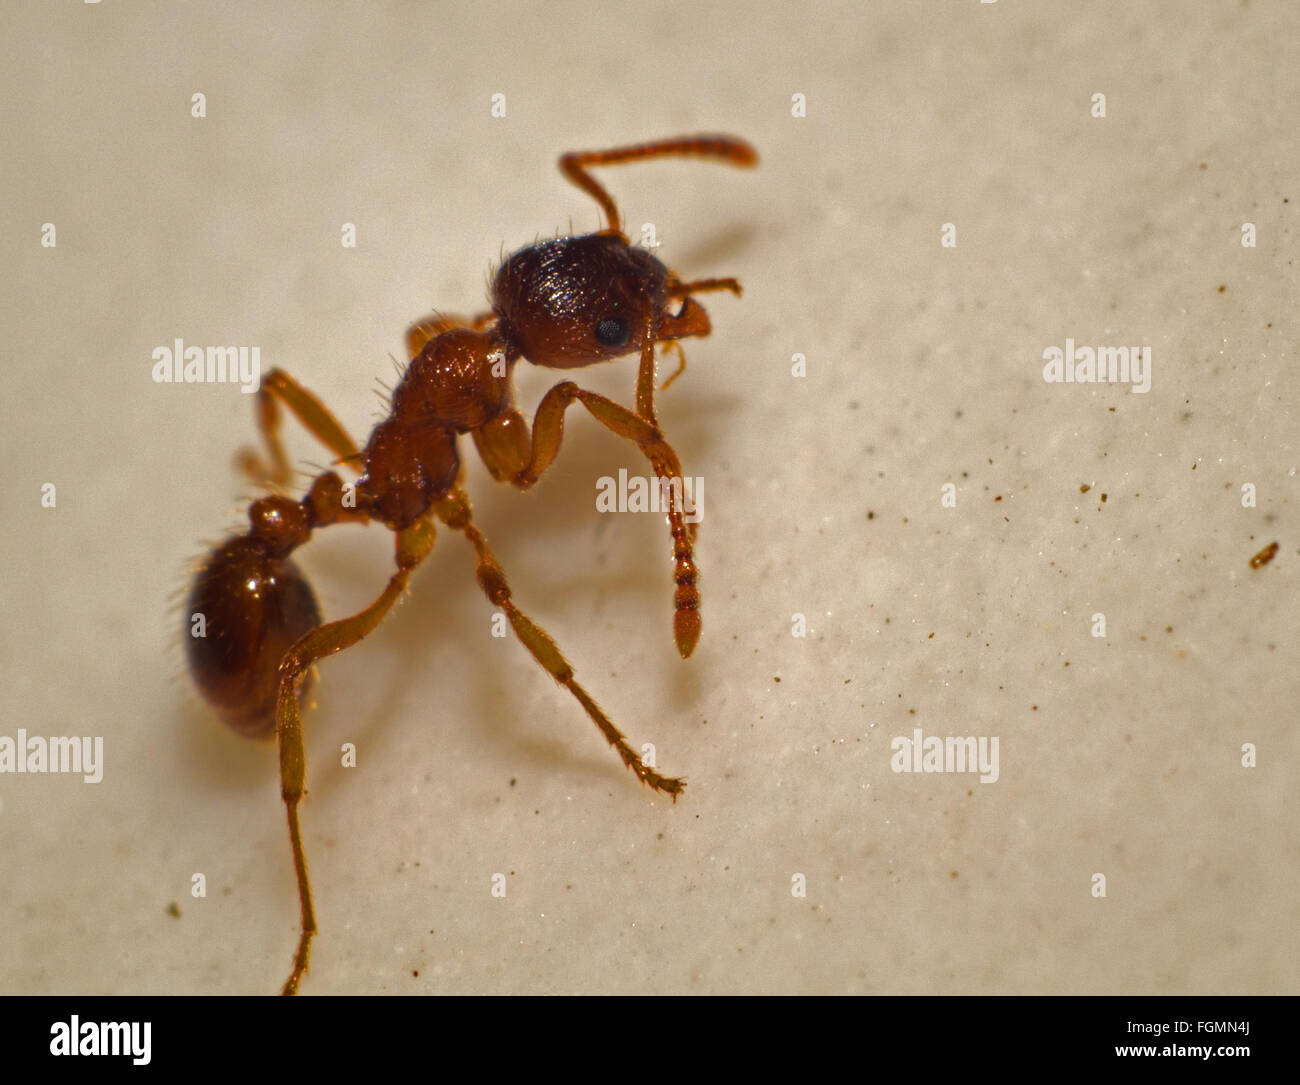 Close-up of a worker ant Stock Photo